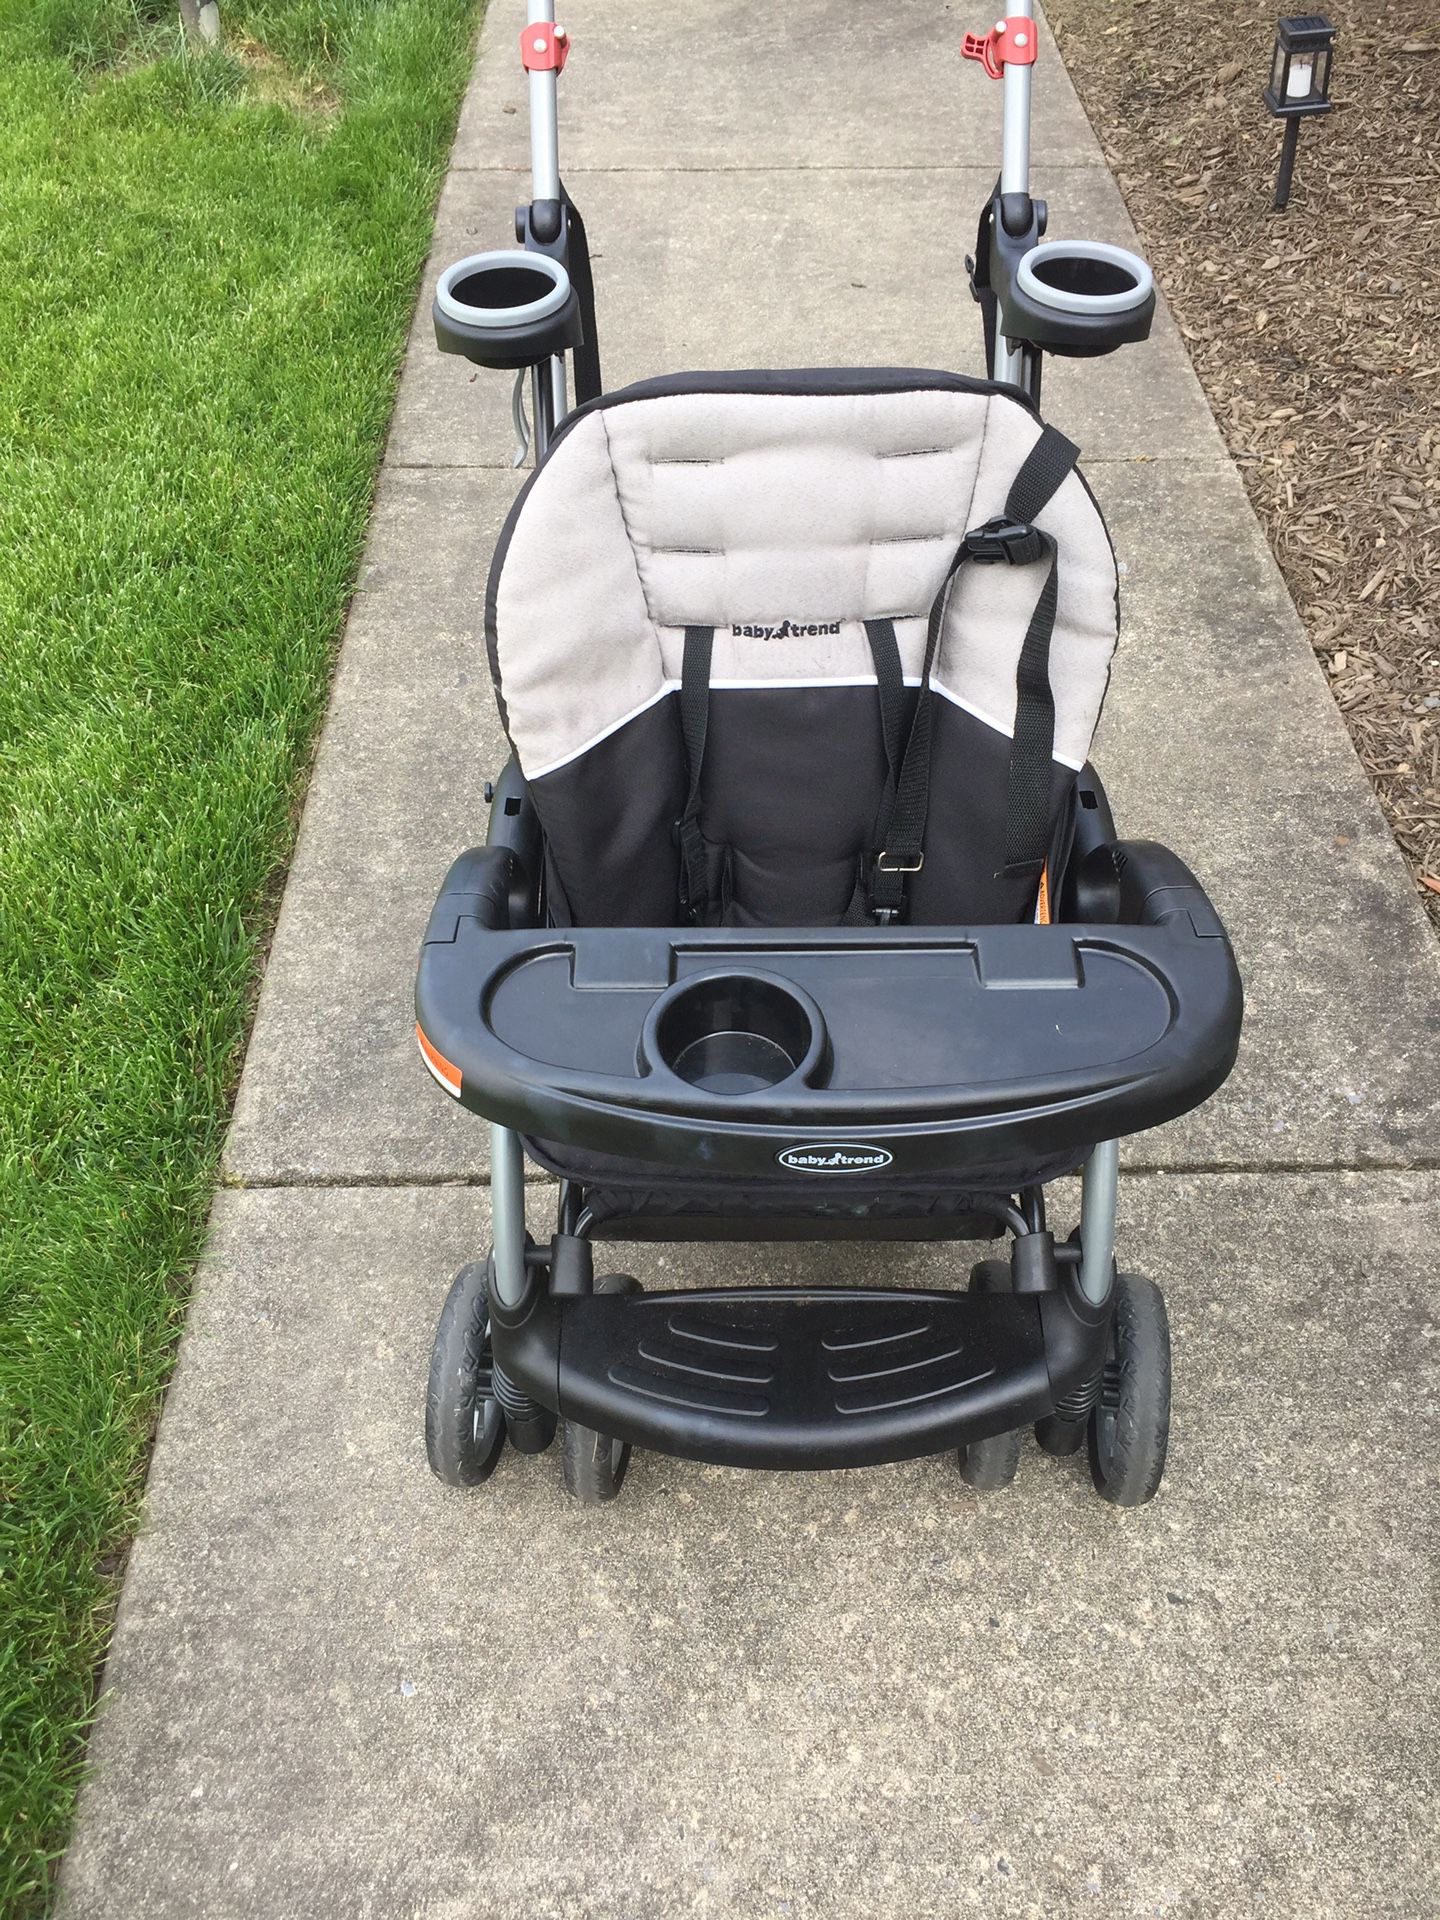 Baby trend double stroller. Great condition.